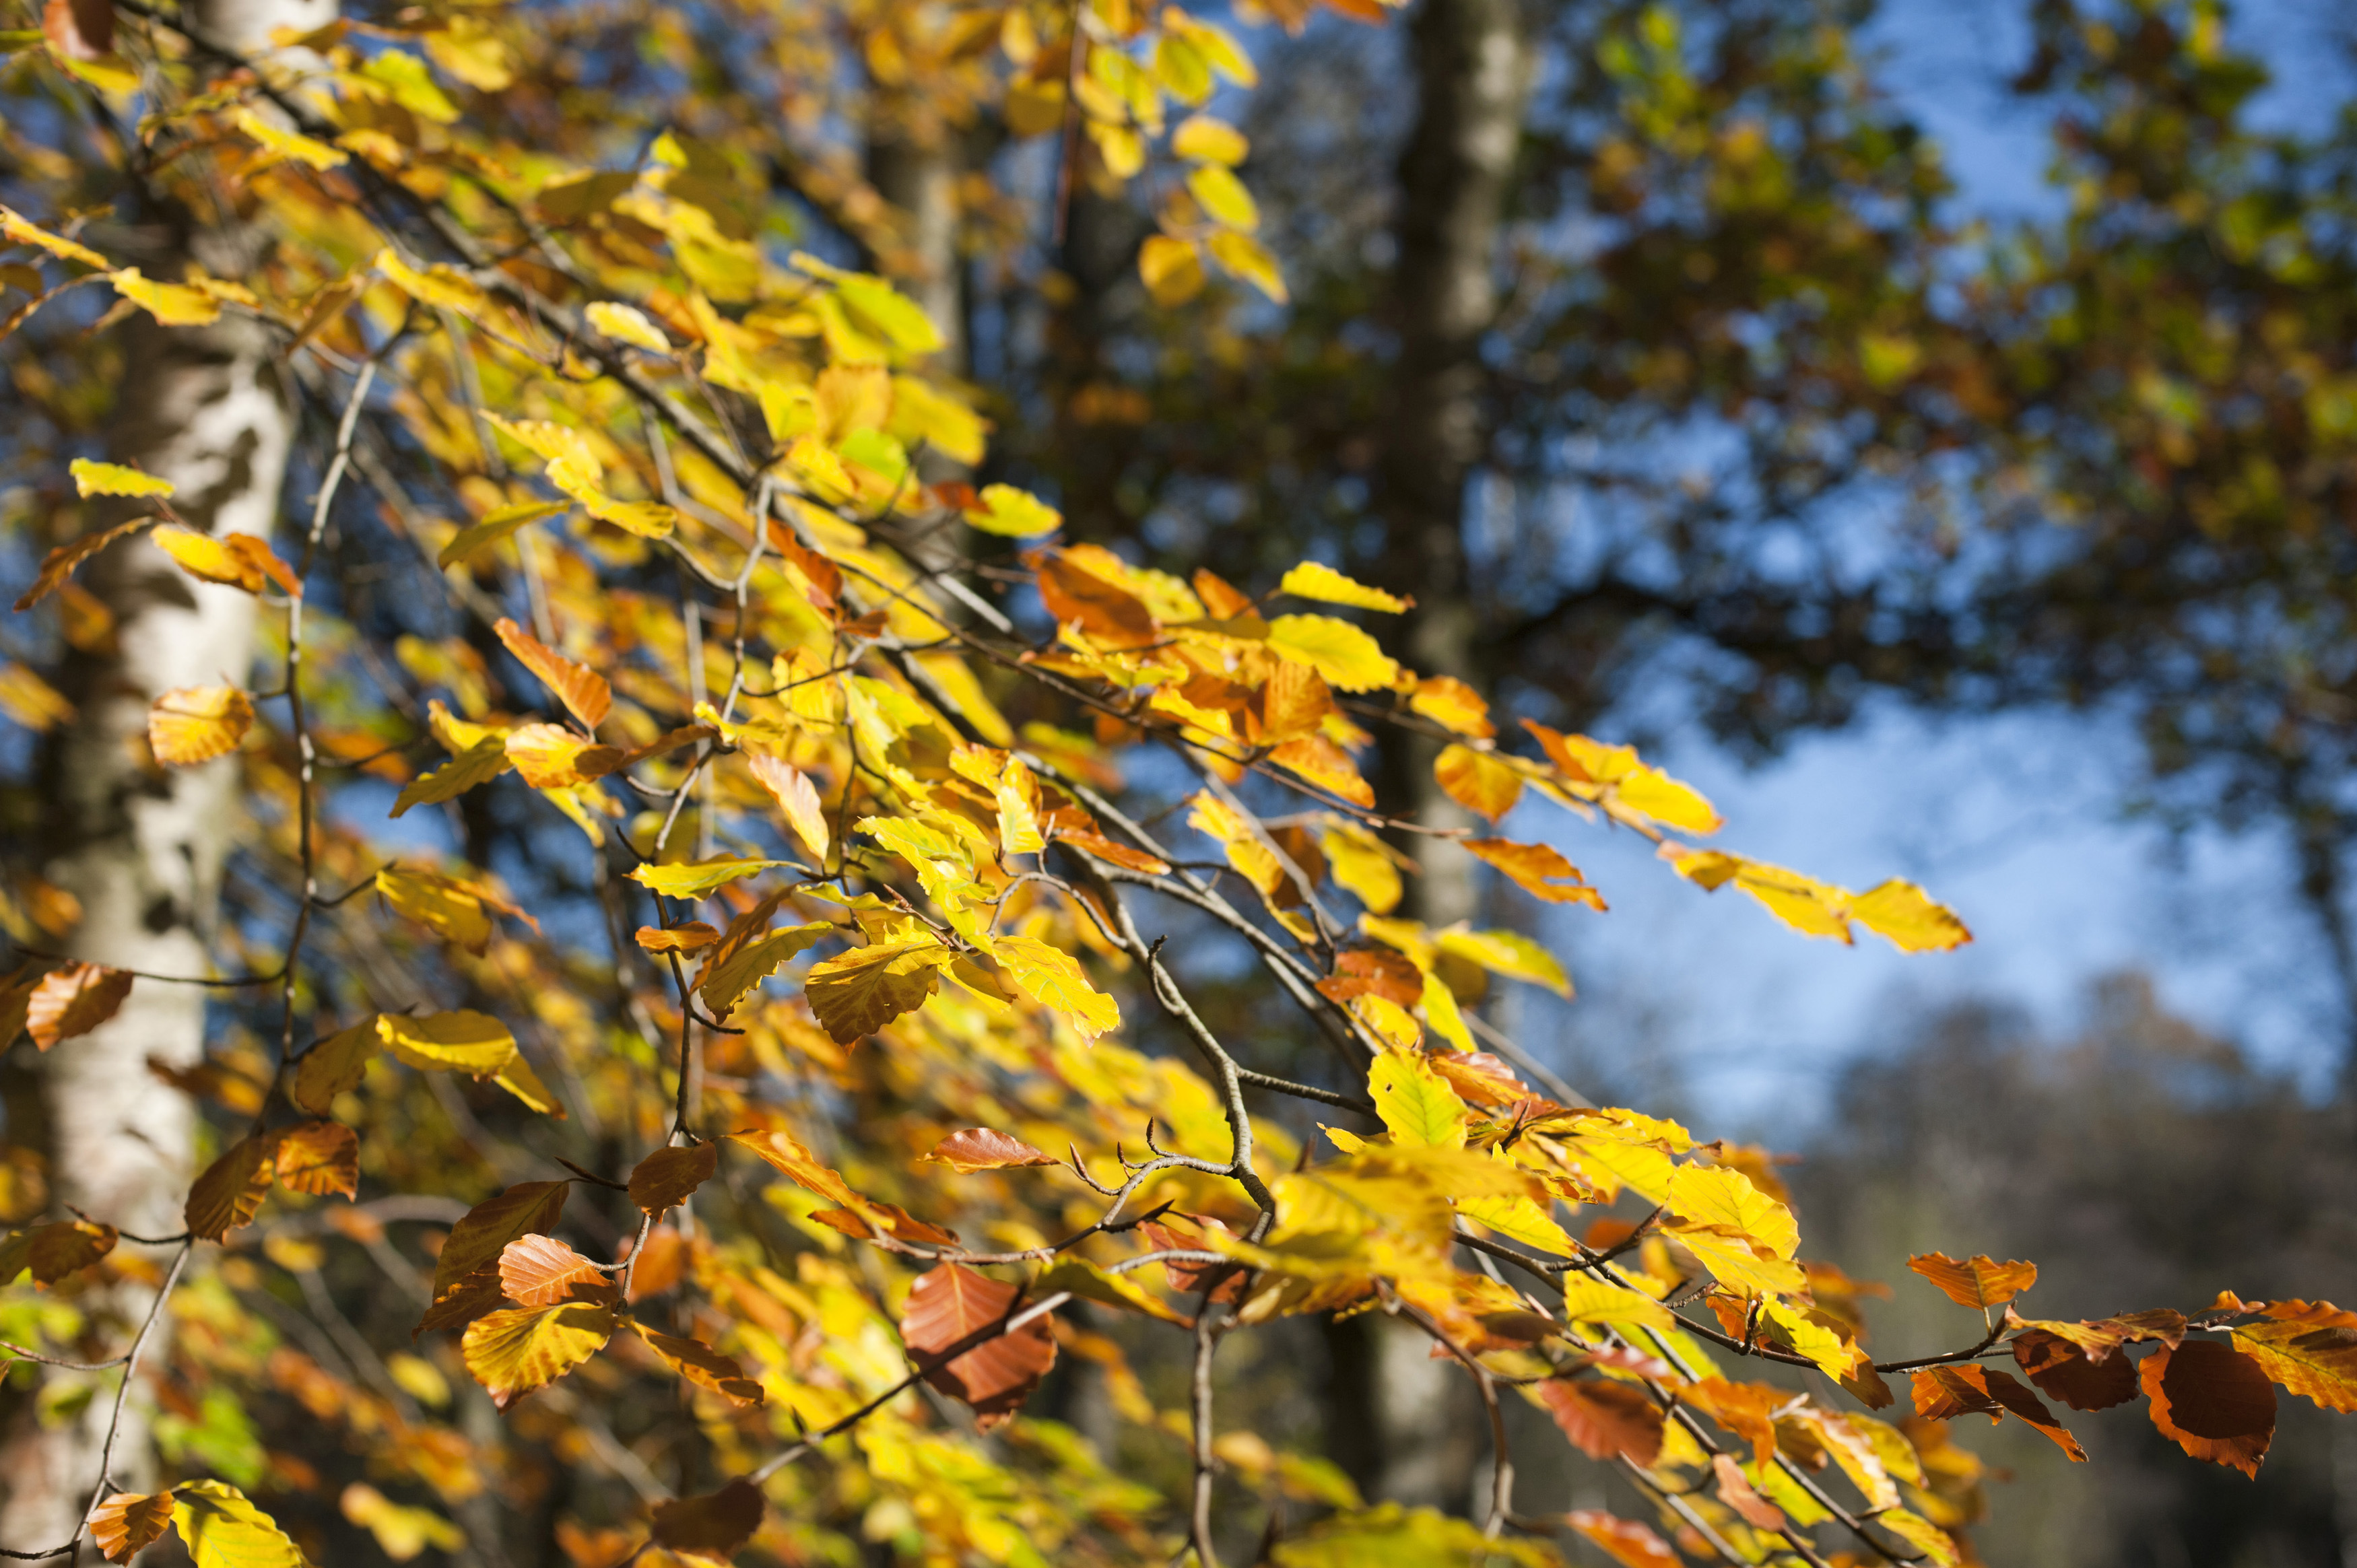 Colorful yellow autumn leaves on a beech tree, close up view 